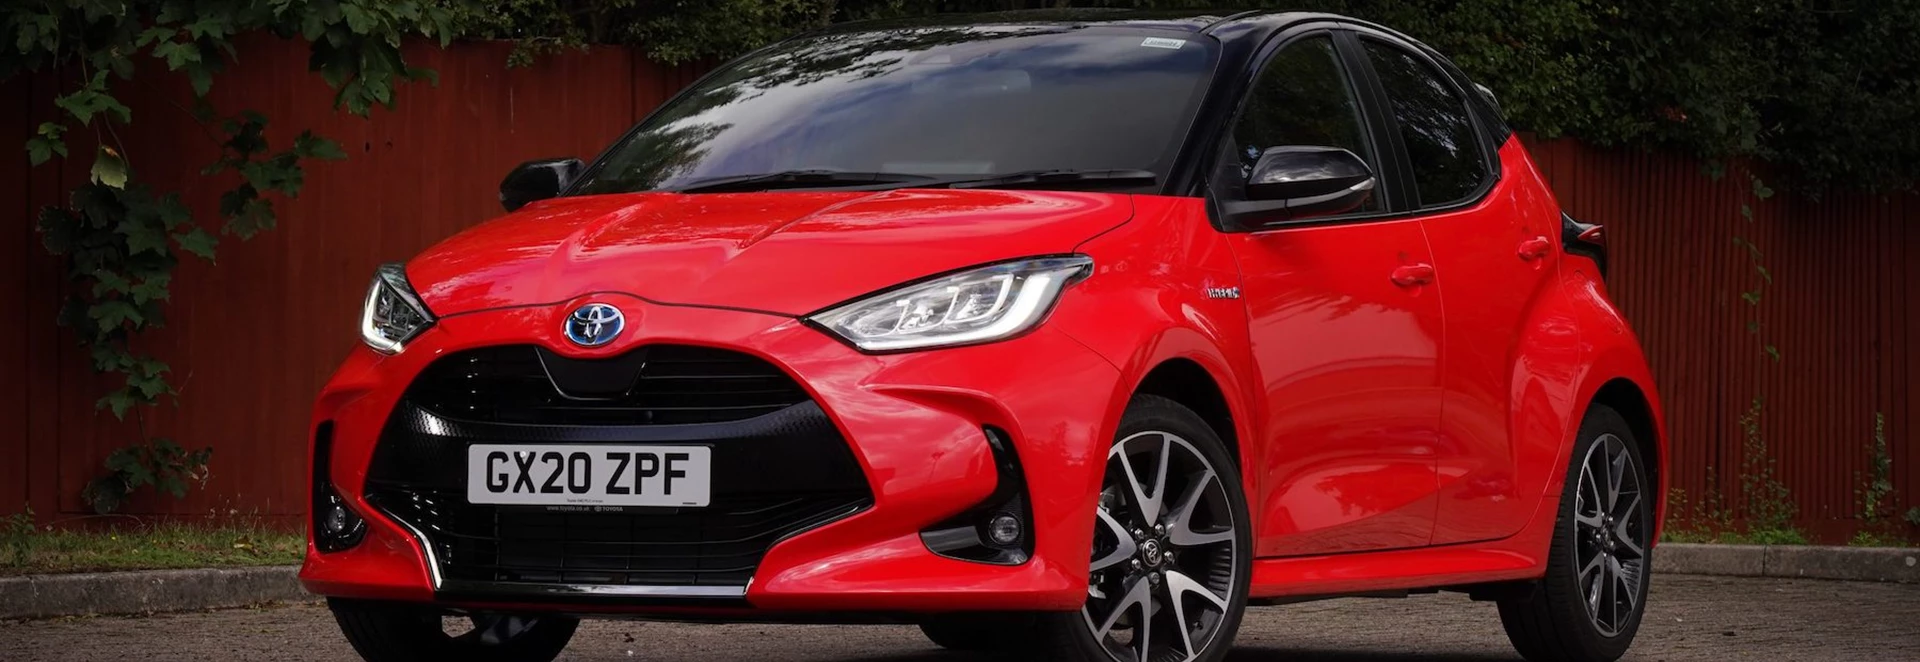 What’s new on the 2020 Toyota Yaris? 